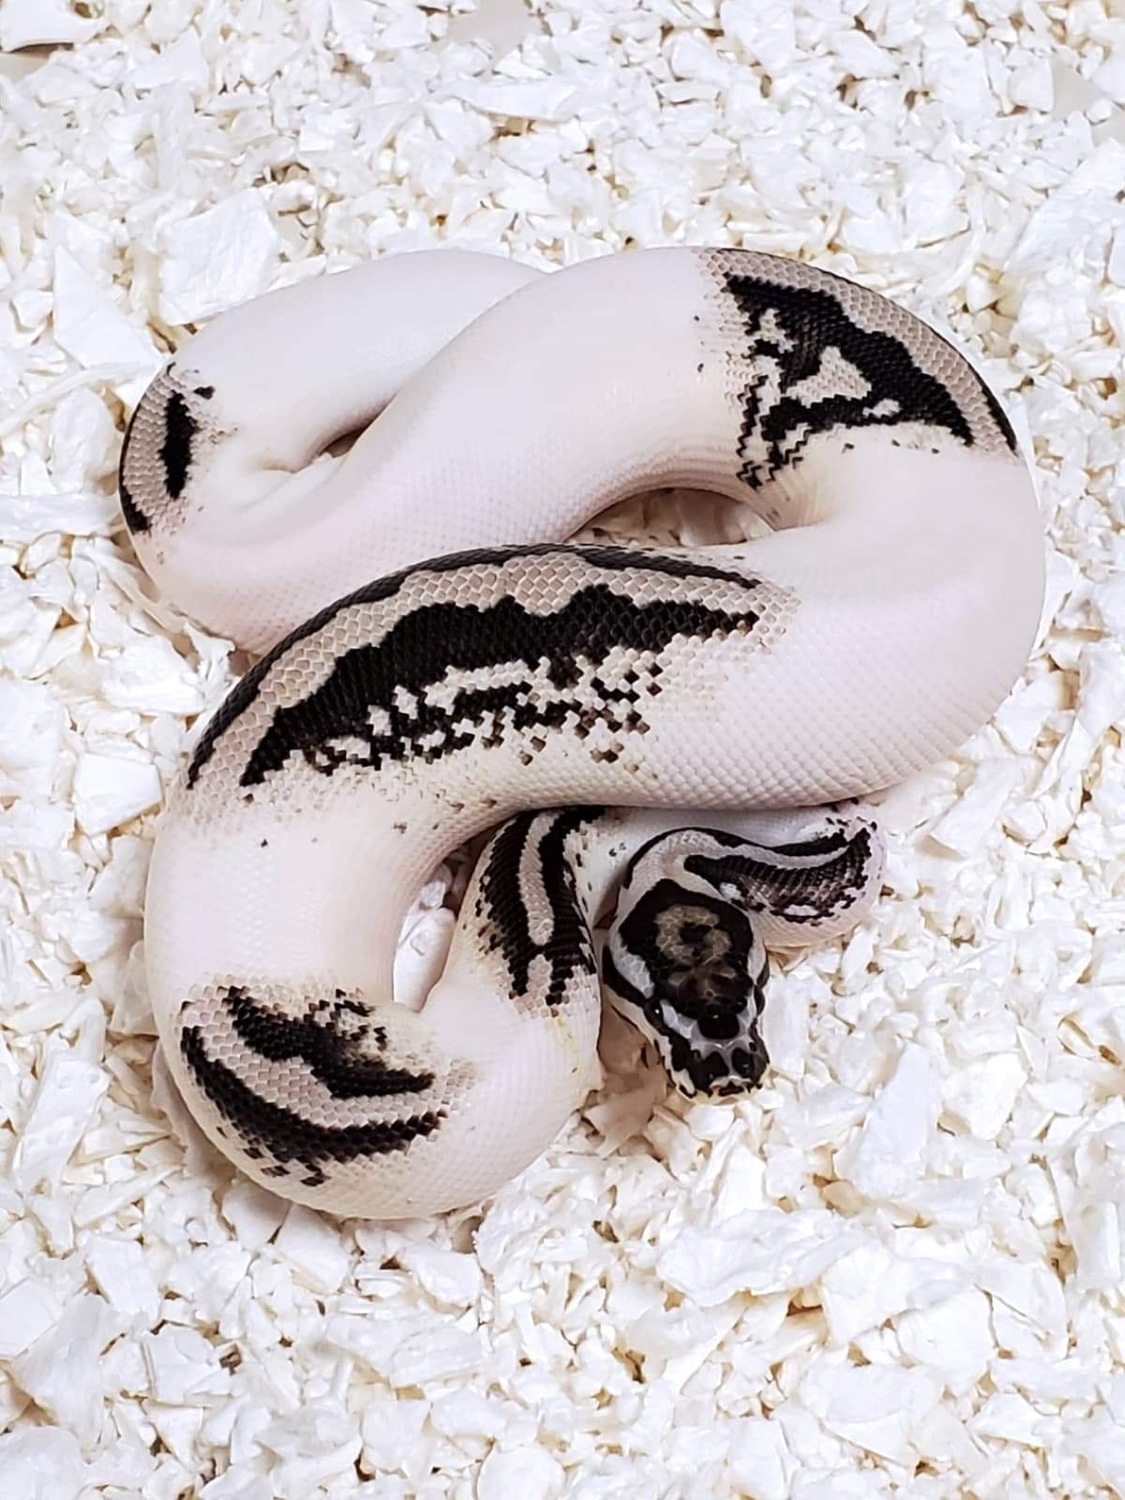 Yellowbelly Axanthic Pied 50% Het Clown Ball Python by Exiled Reptiles